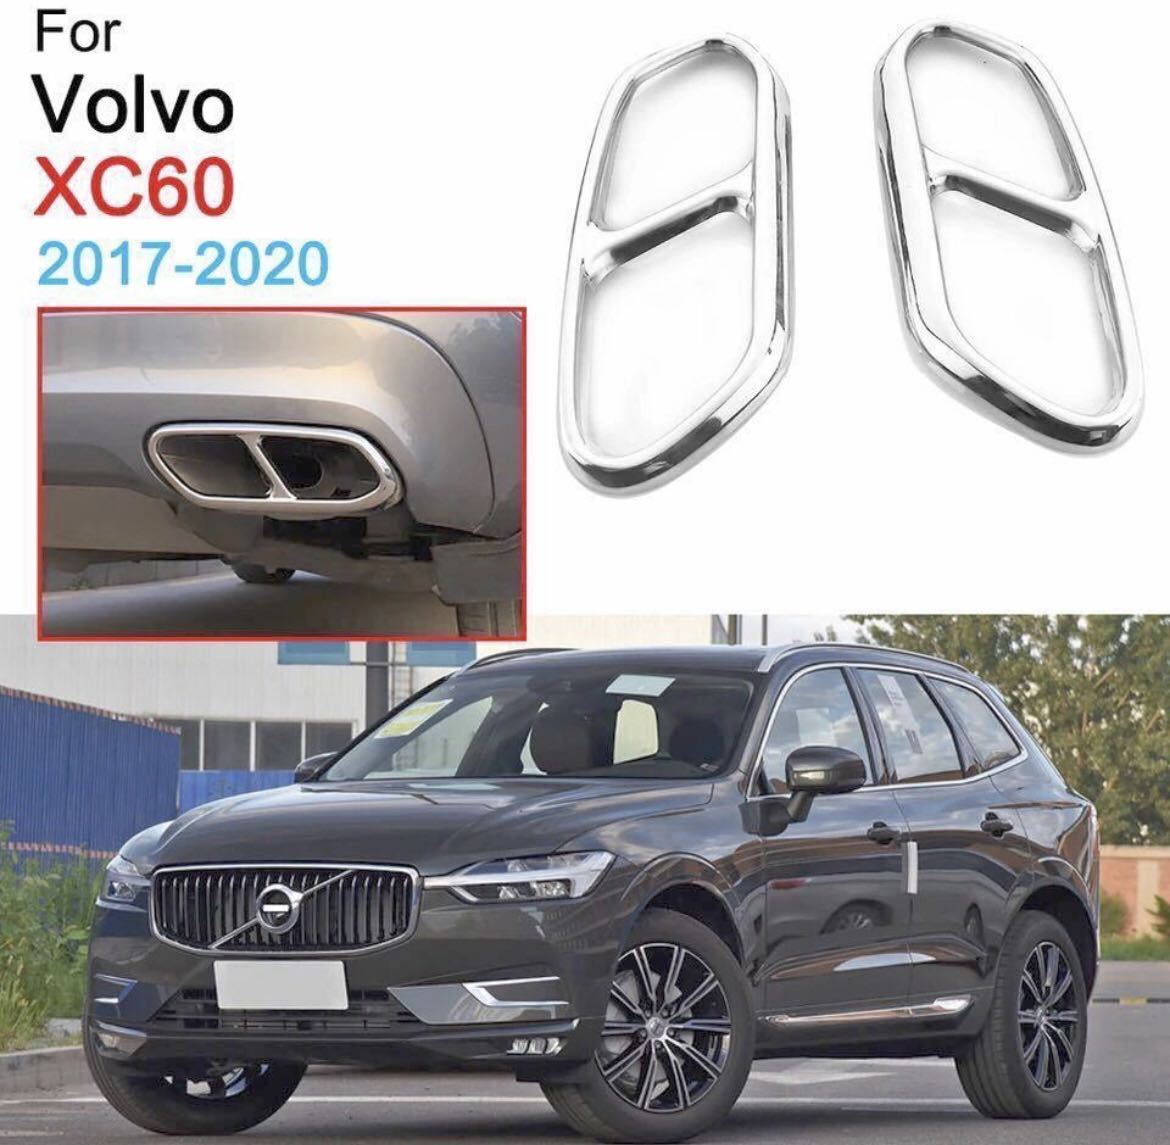  returned goods guarantee / postage included / Volvo XC60 muffler cover left right set stainless steel Volvo XC60 [2017-] after market goods custom muffler cutter 